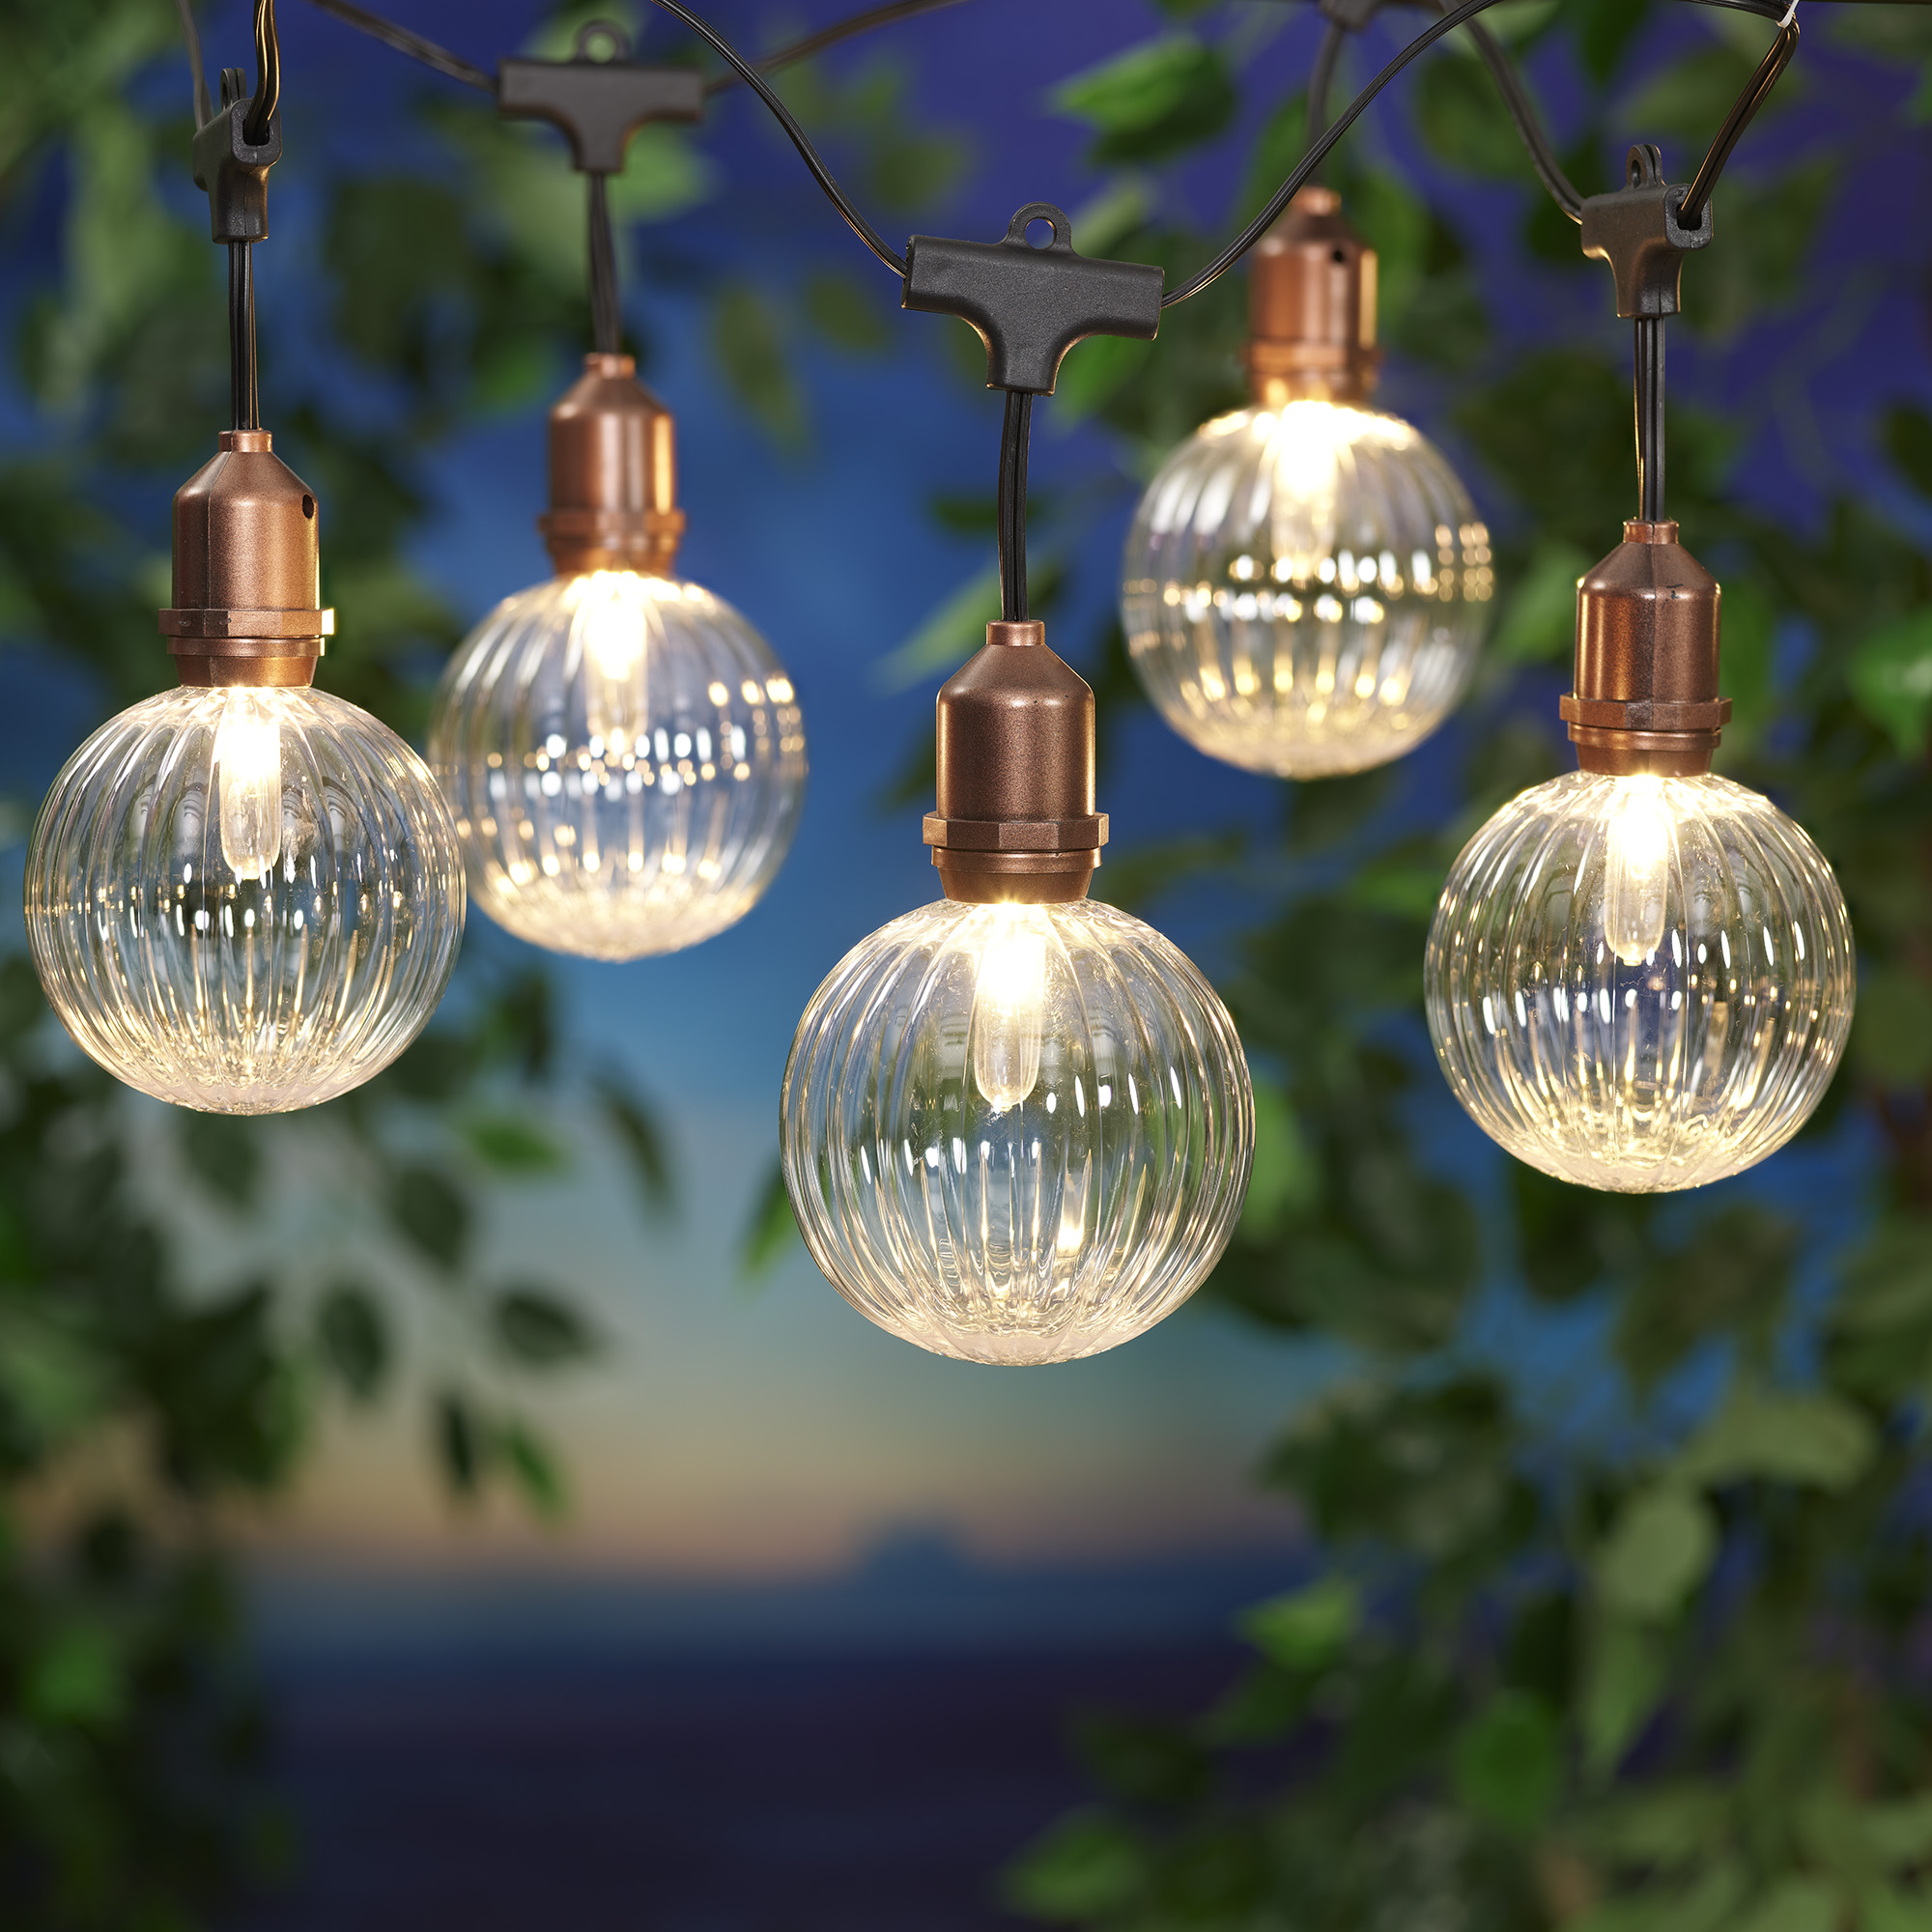 Better Homes & Gardens 10-Count Warm White LED Ribbed Outdoor String Lights - image 1 of 9